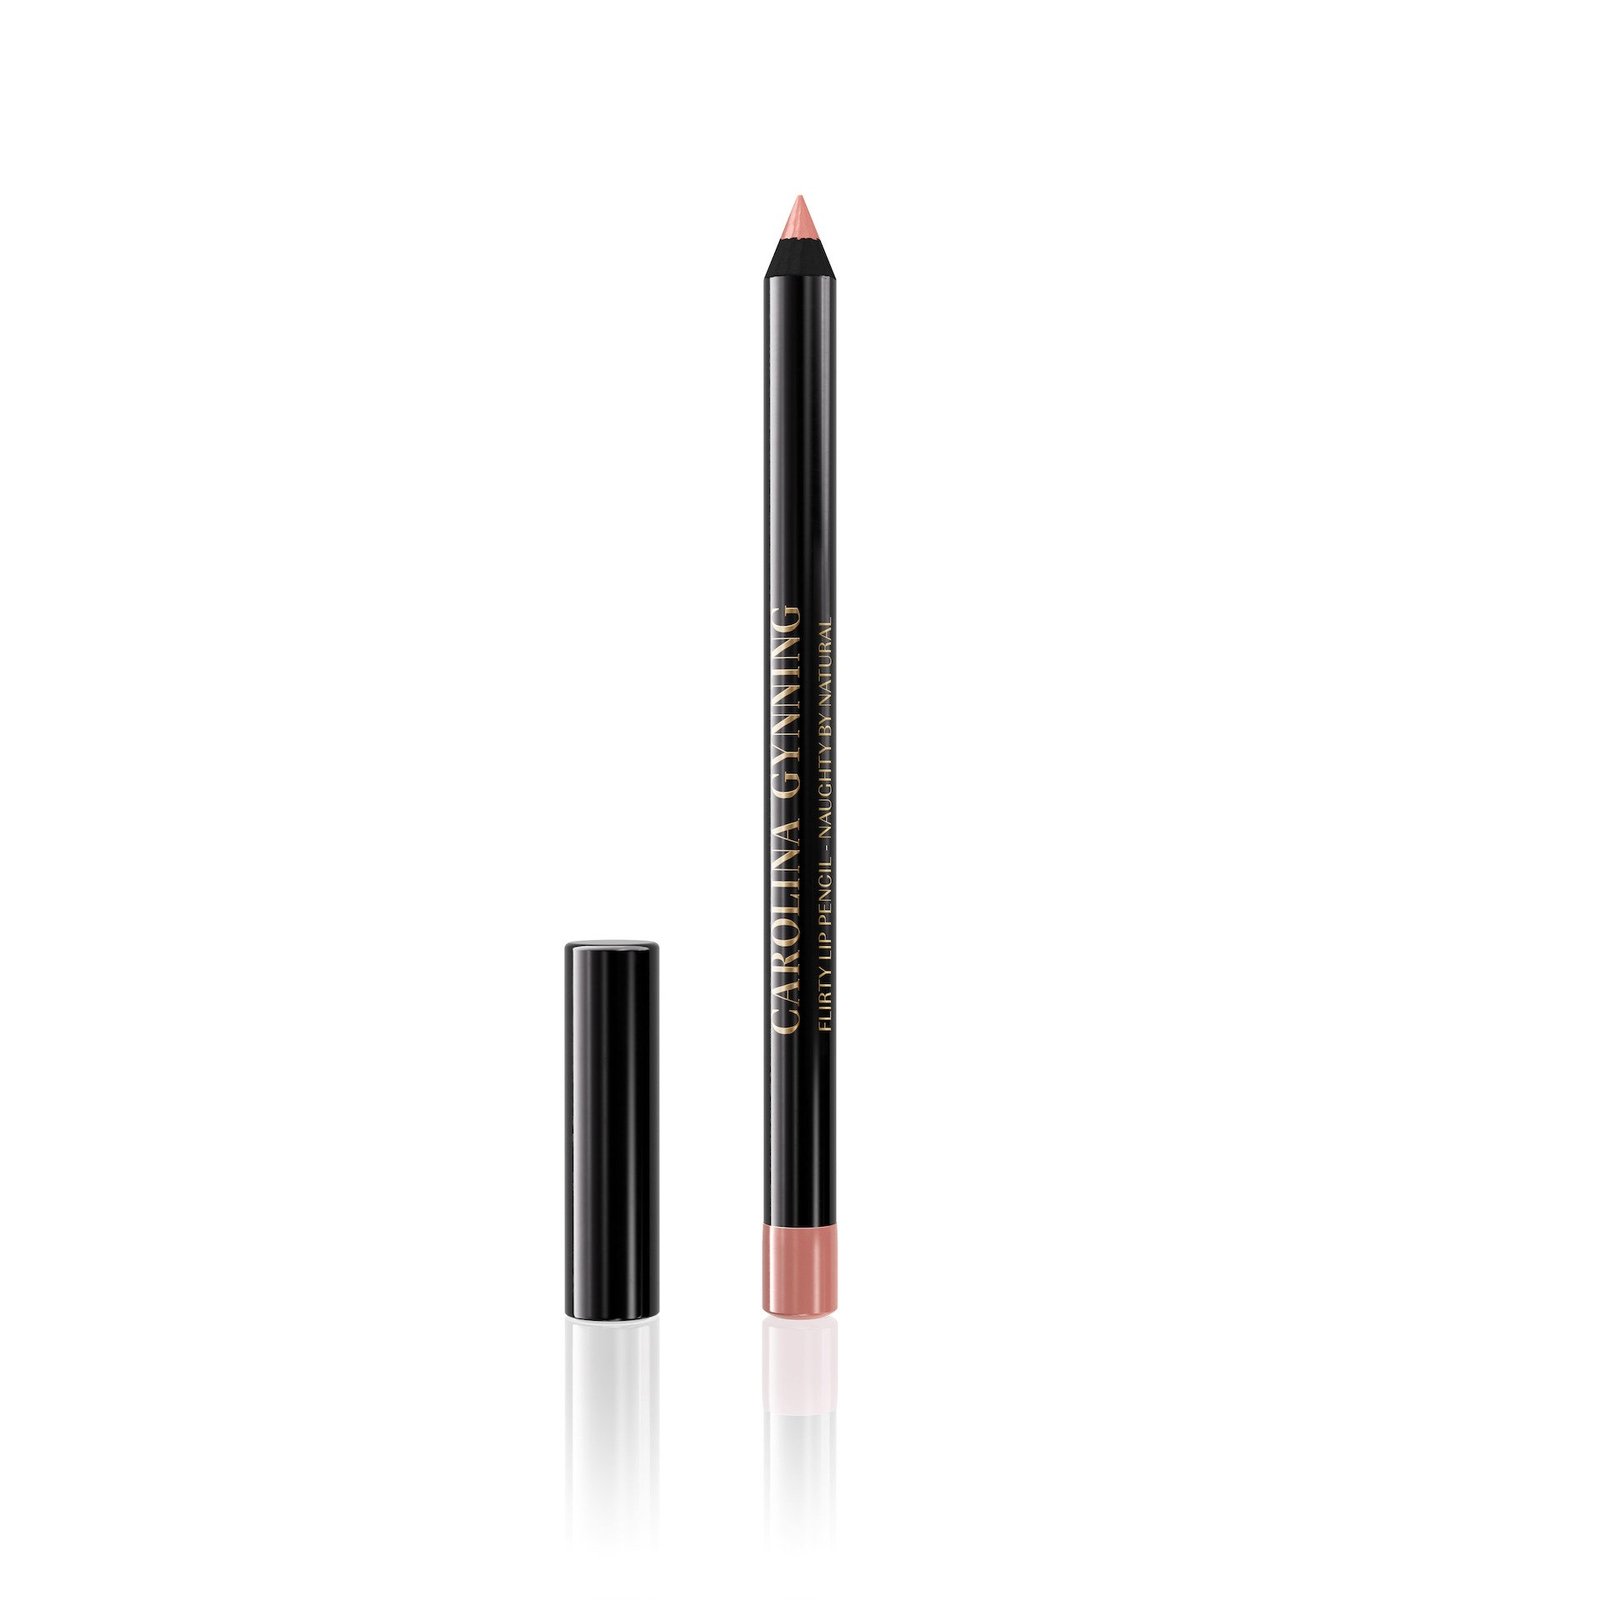 Gynning Beauty Flirty Lip Pencil Naughty by Natural